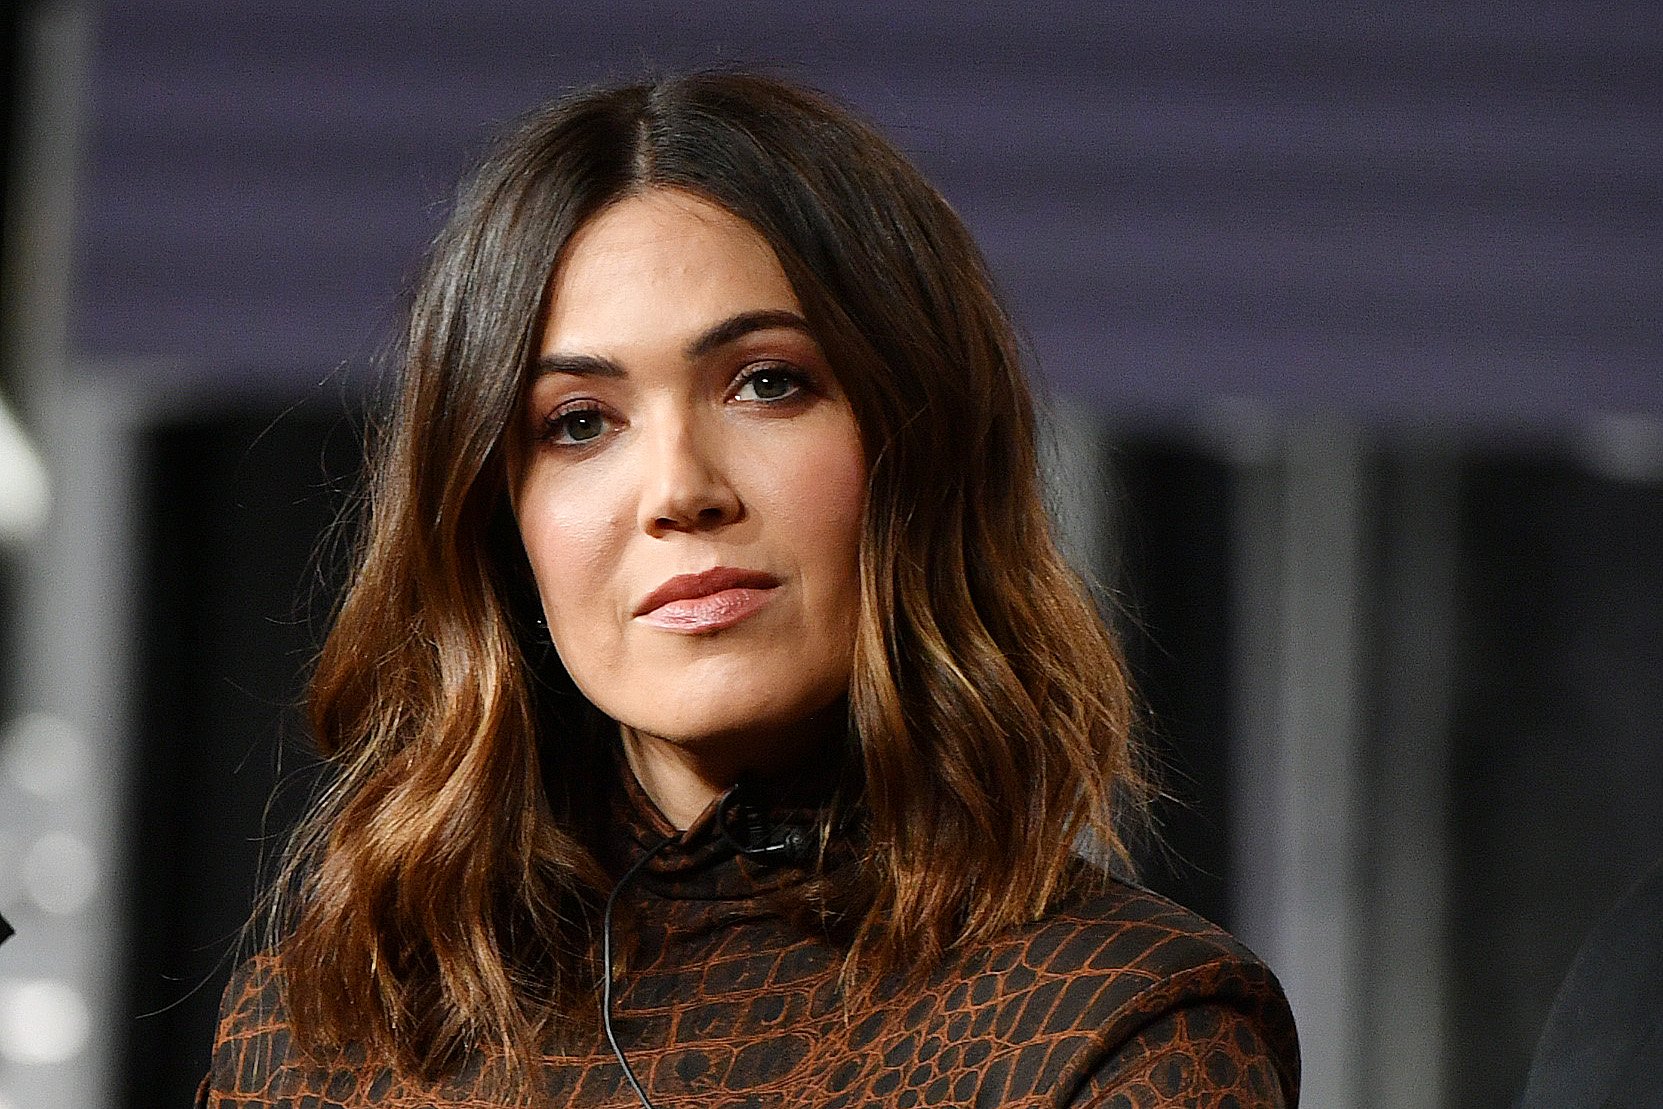 Mandy Moore during the NBCUniversal segment of the 2020 Winter TCA Press Tour at The Langham Huntington on January 11, 2020 in Pasadena, California | Photo: Getty Images